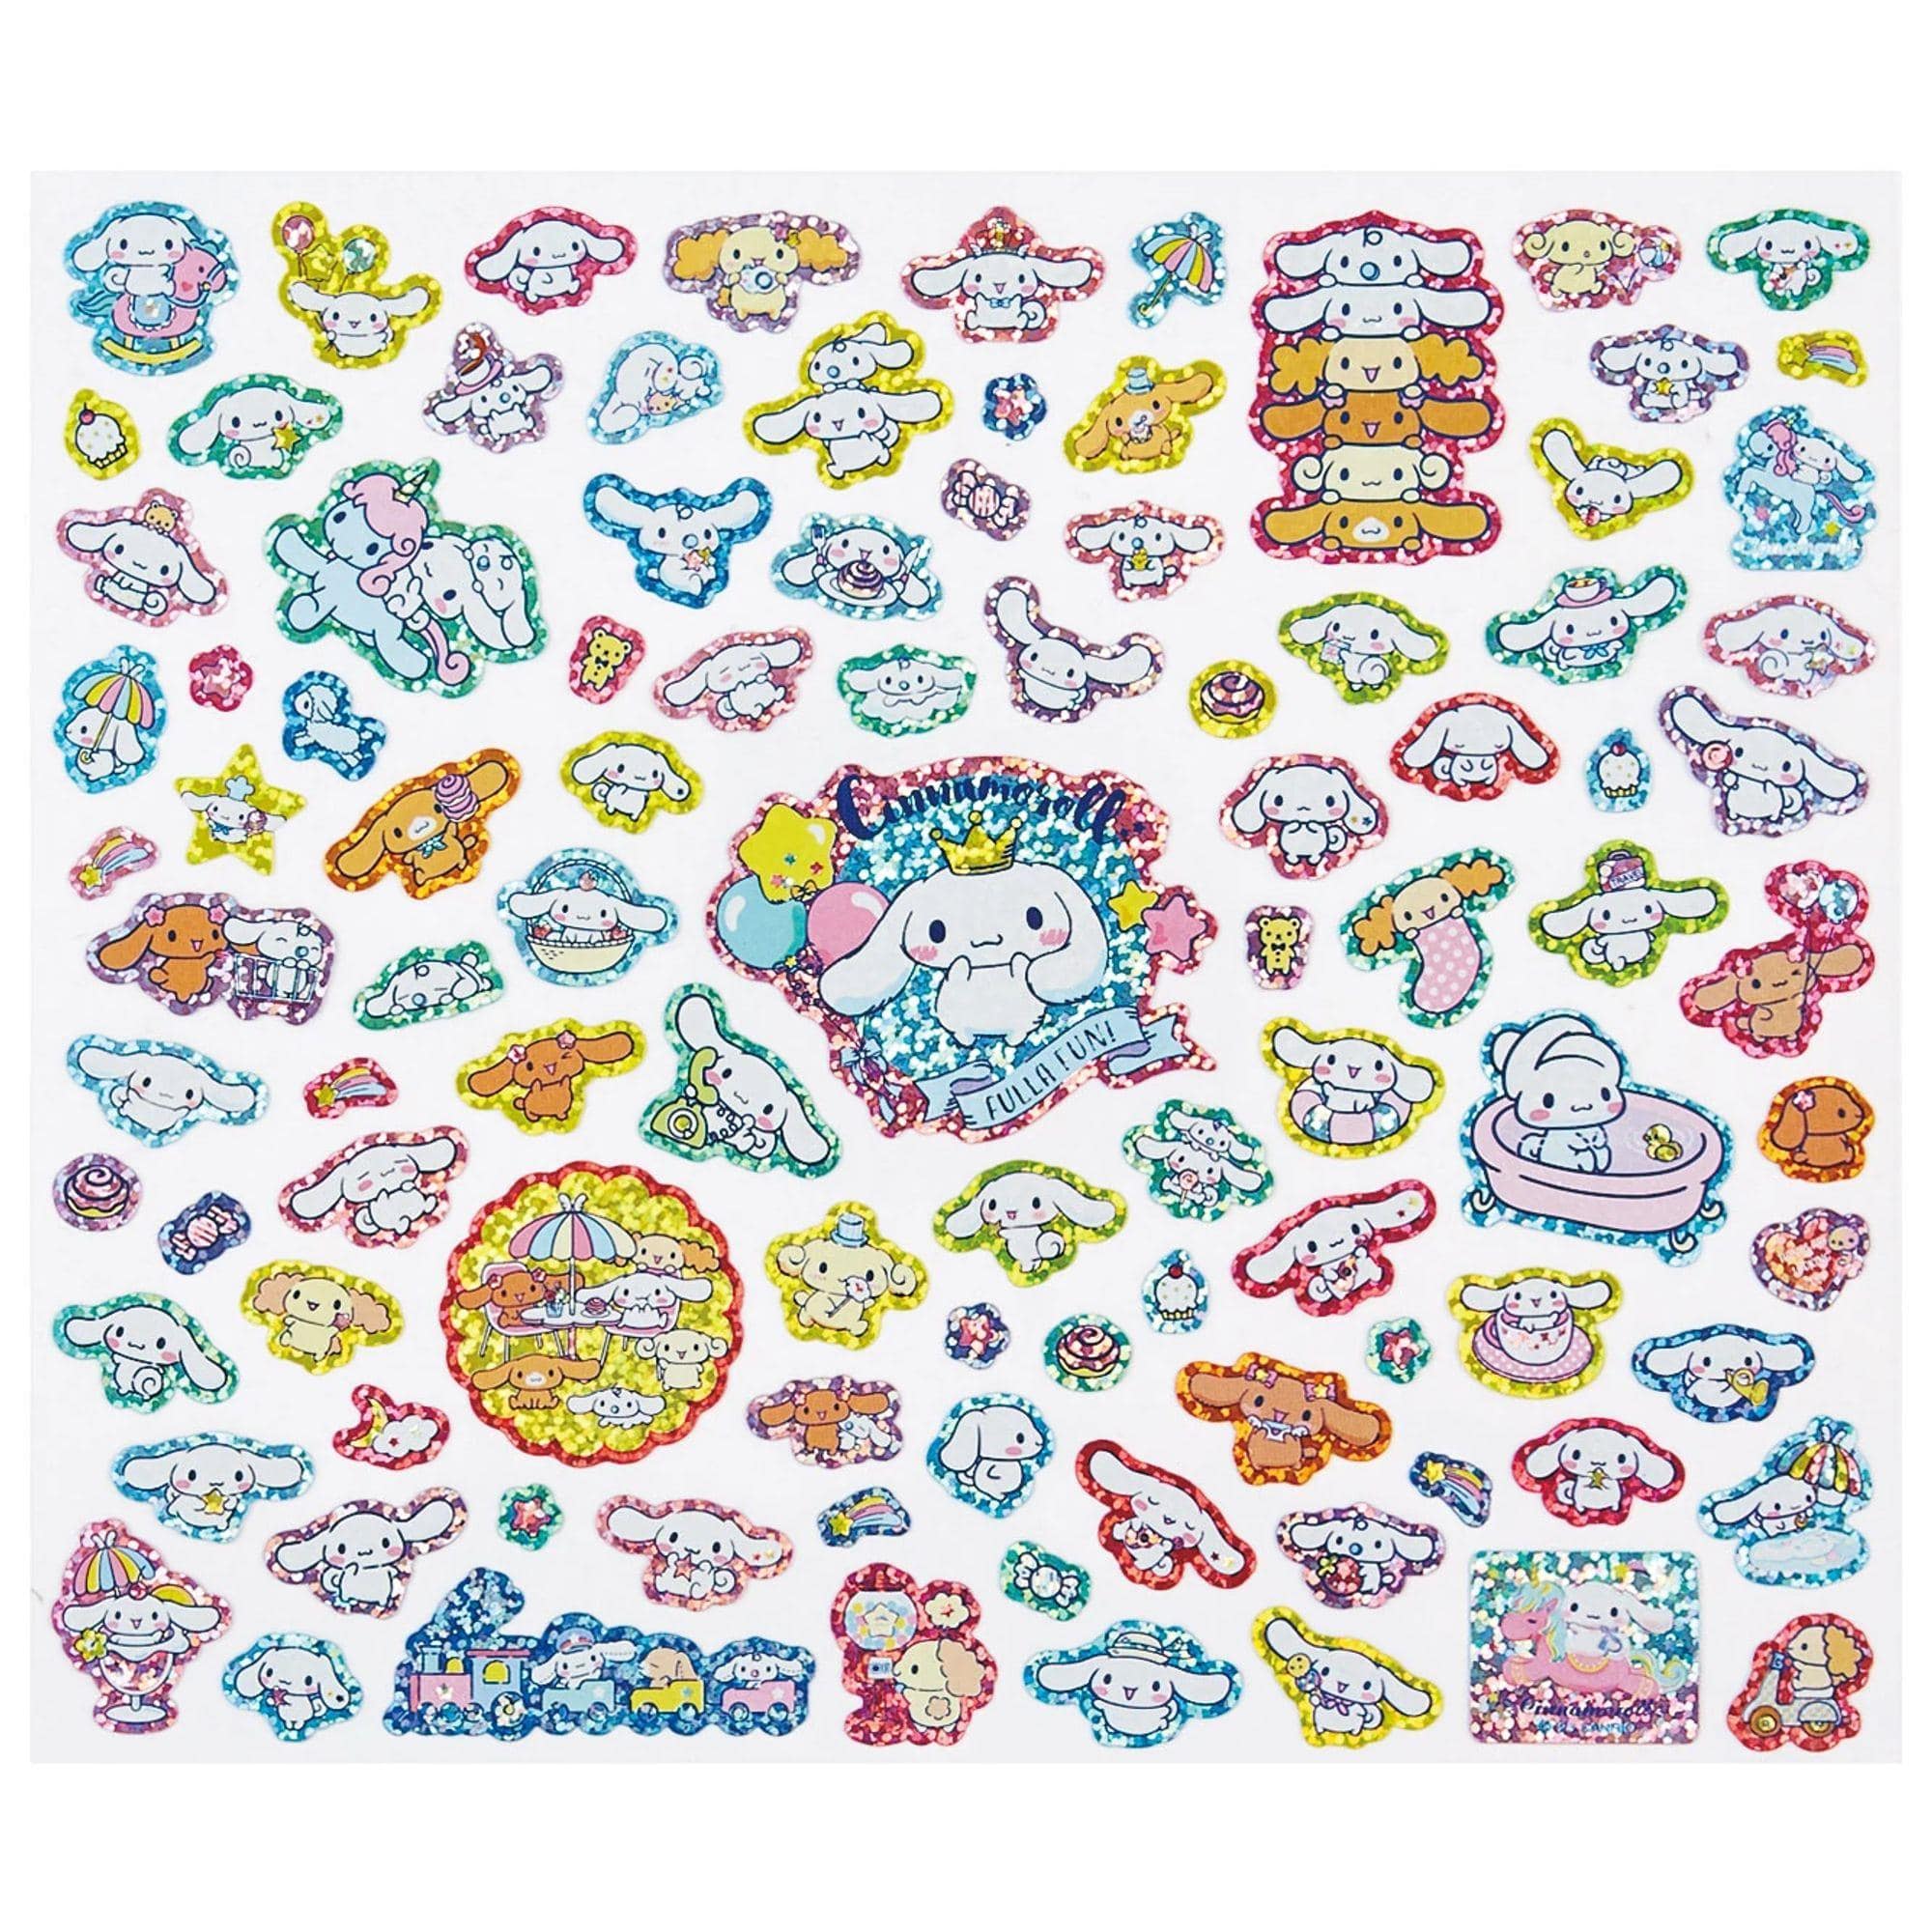 Top 5 Cute Japanese Stickers